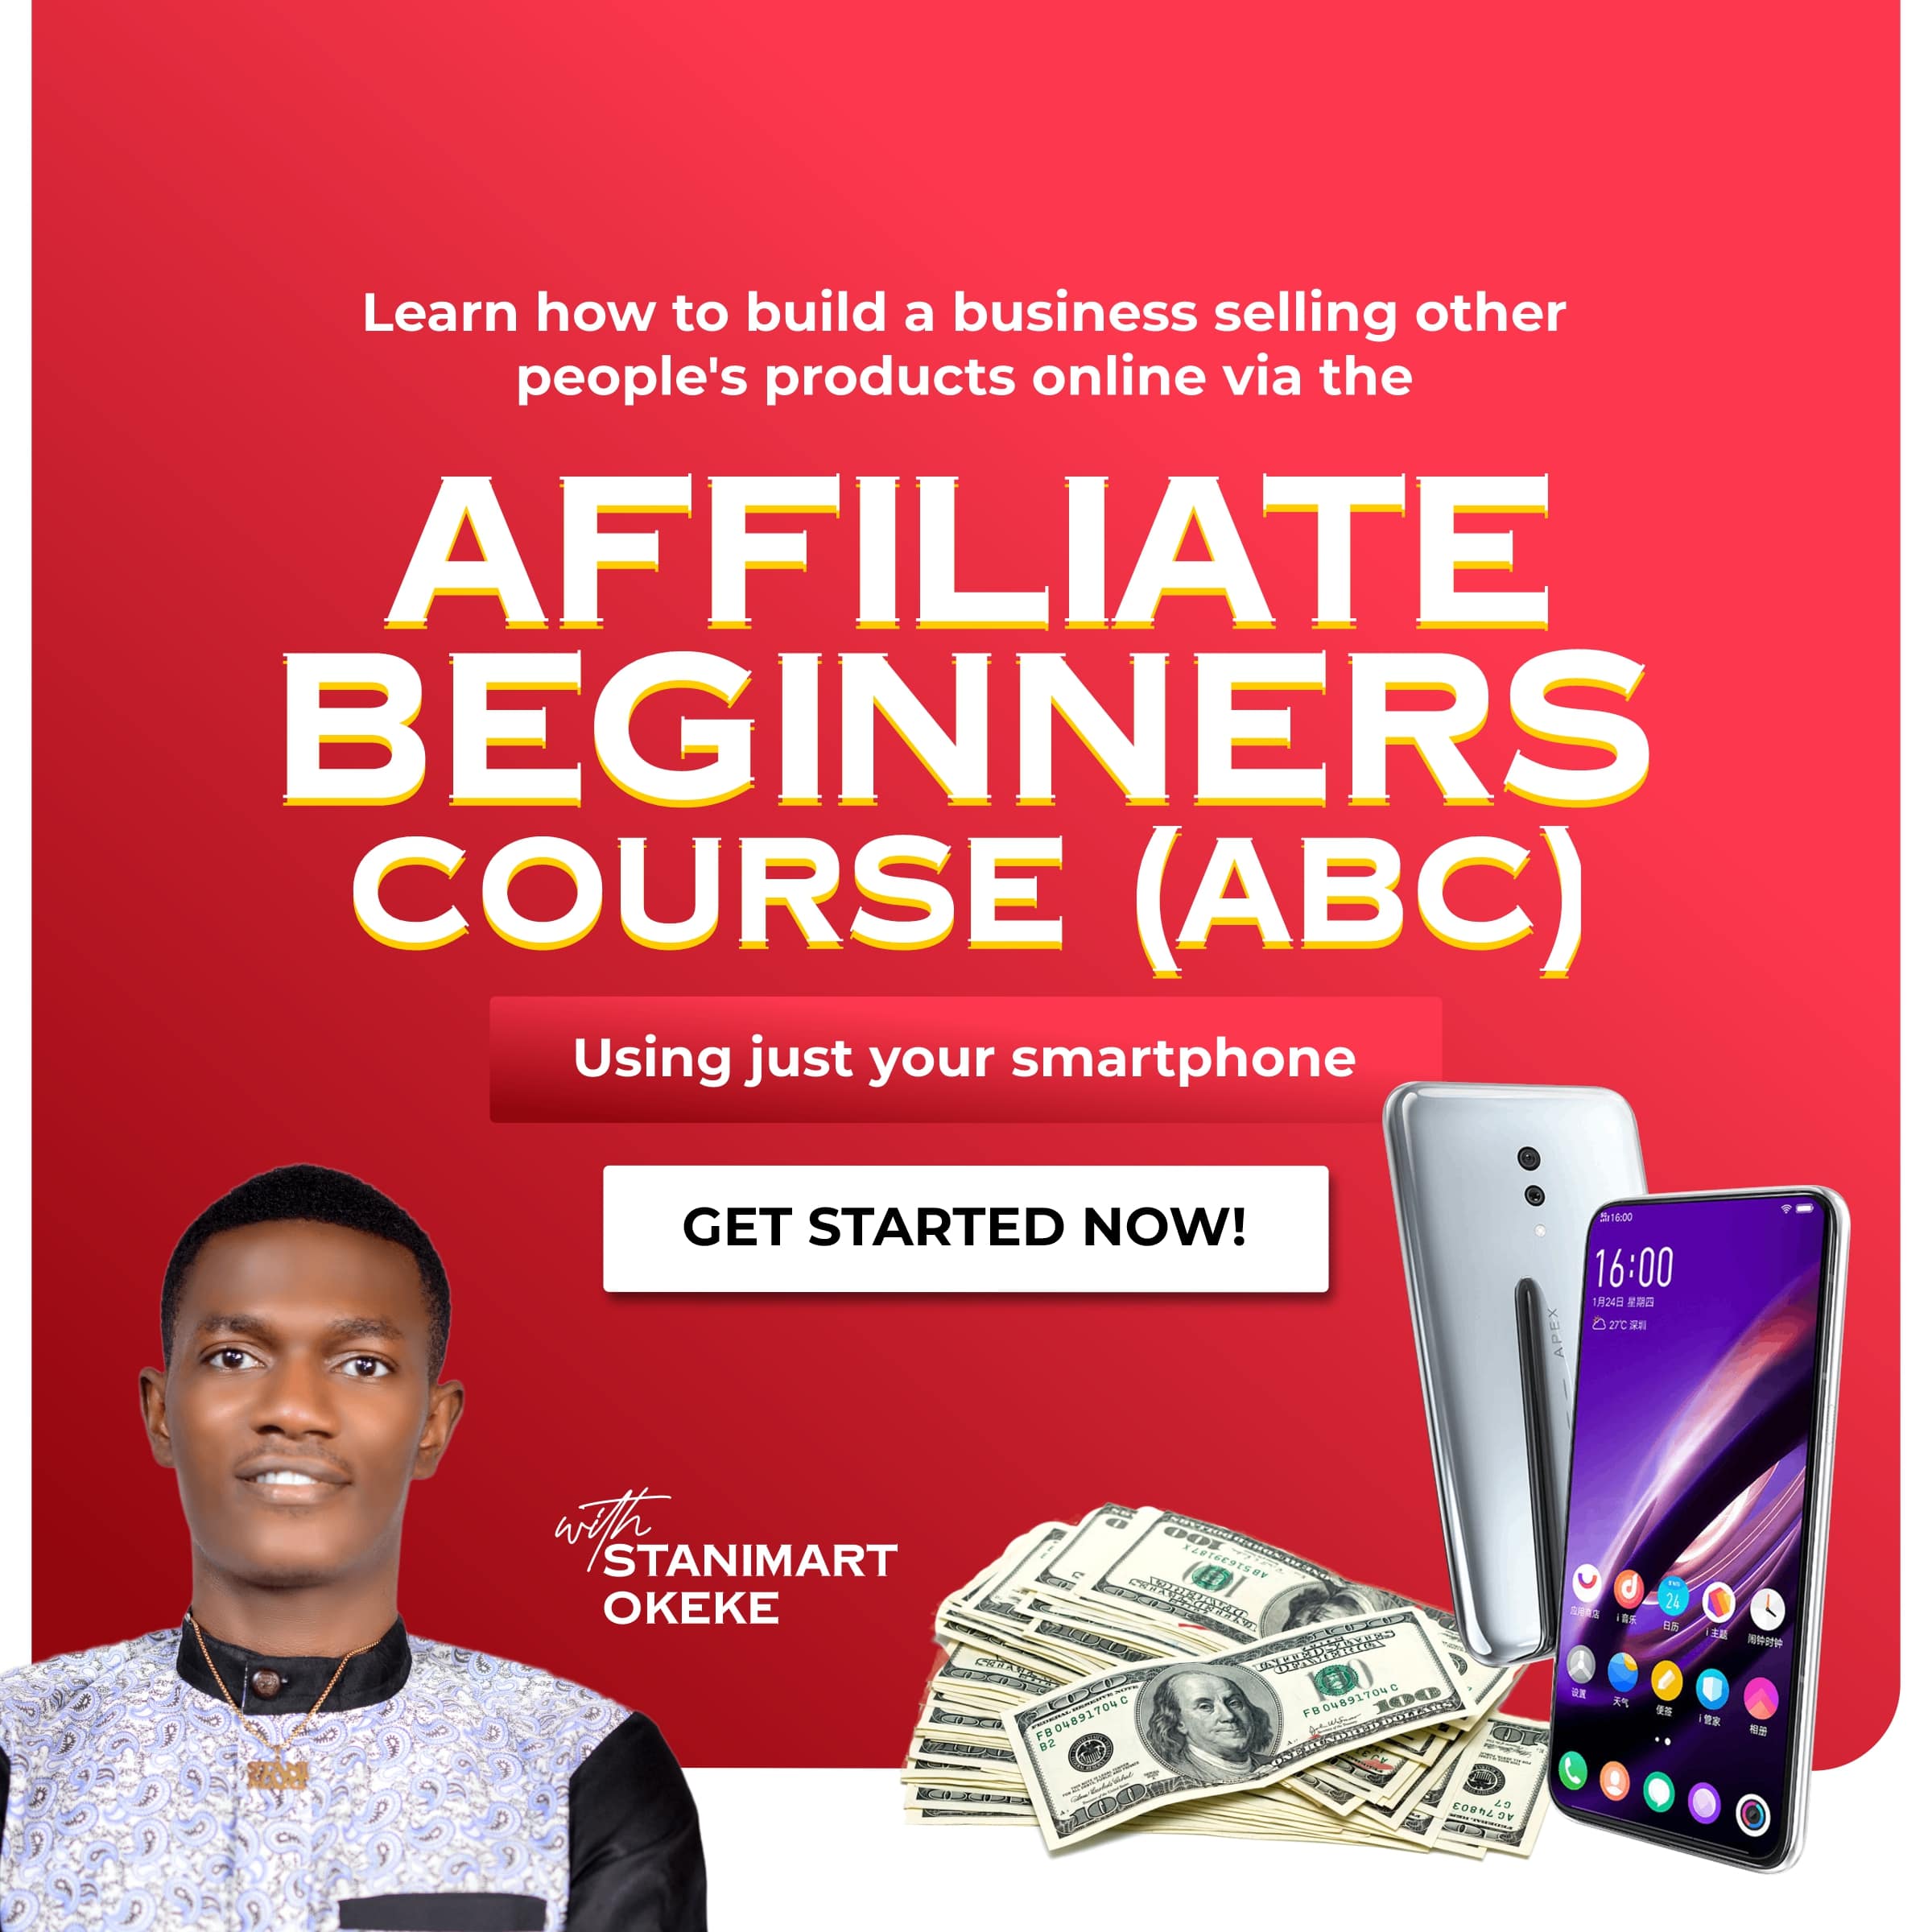 Affiliate Beginners Course (ABC)